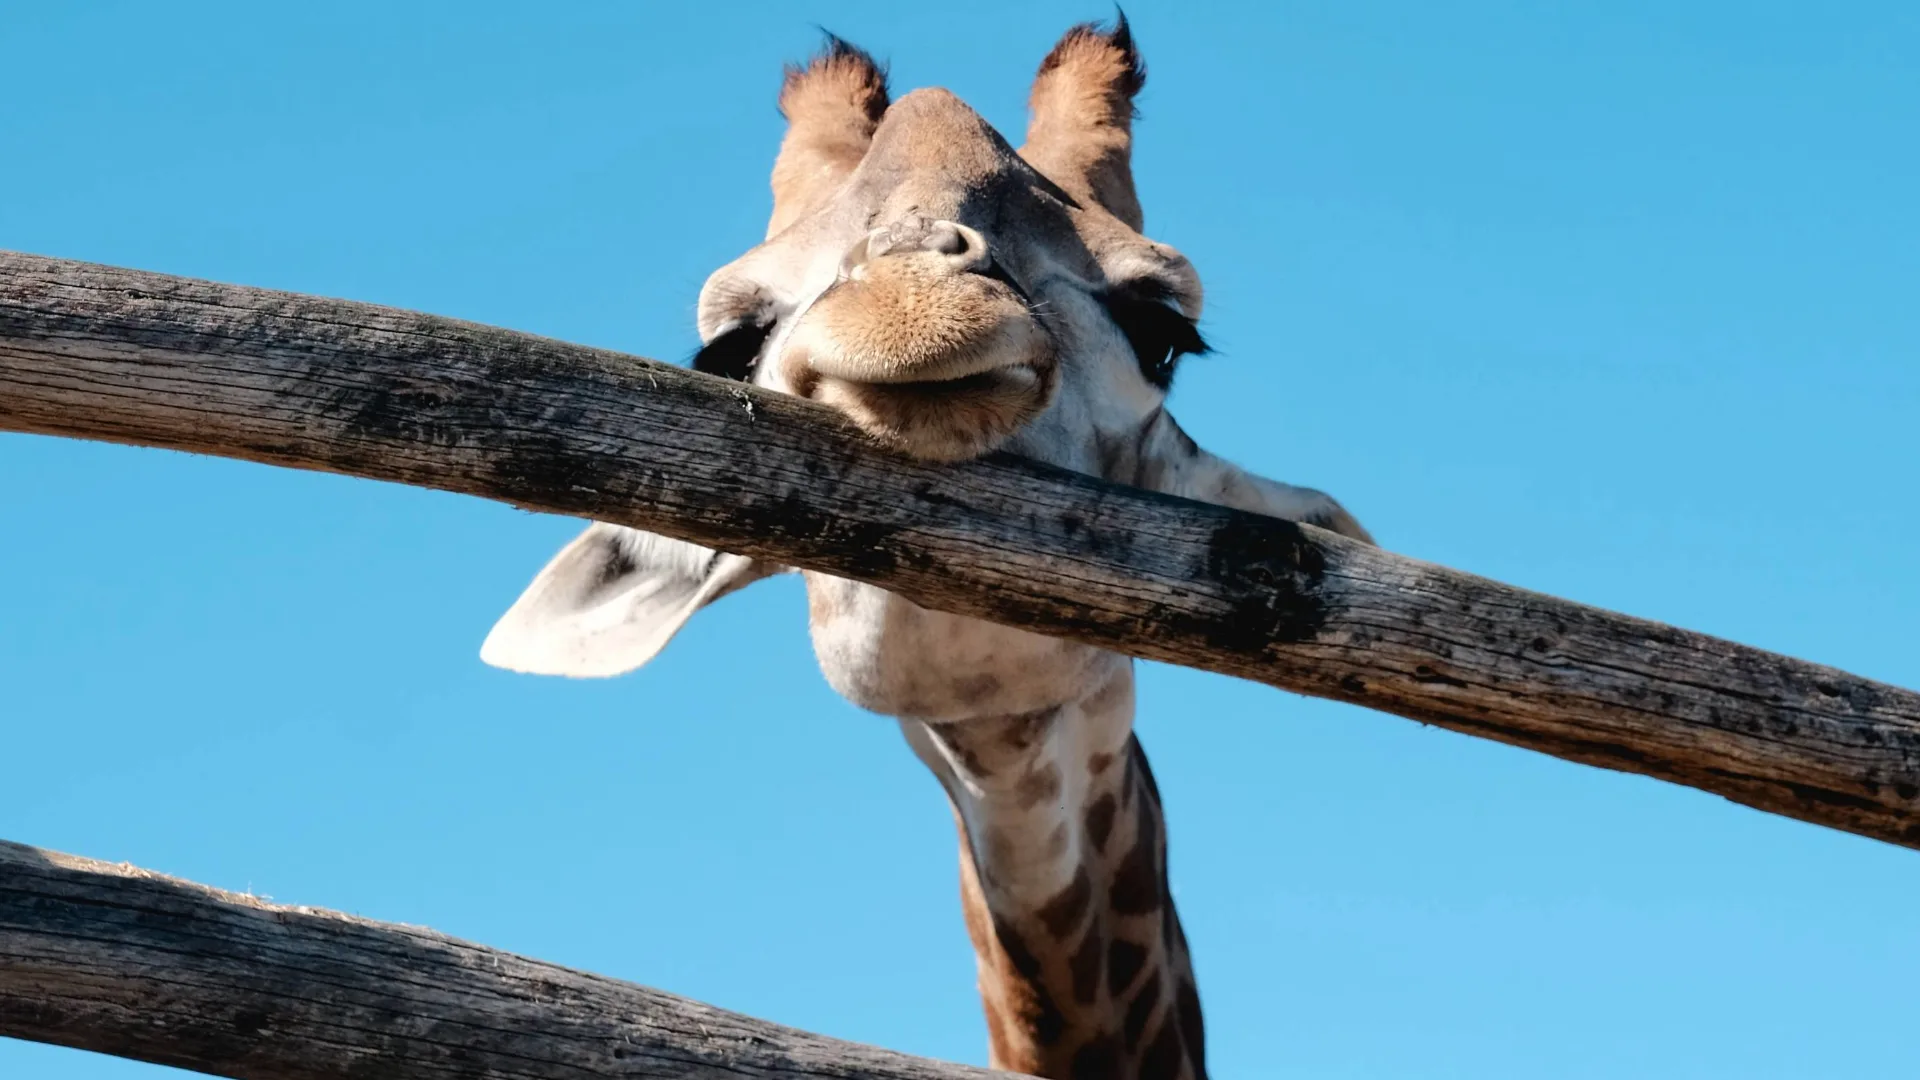 Giraffe peering over a fence with a blue background